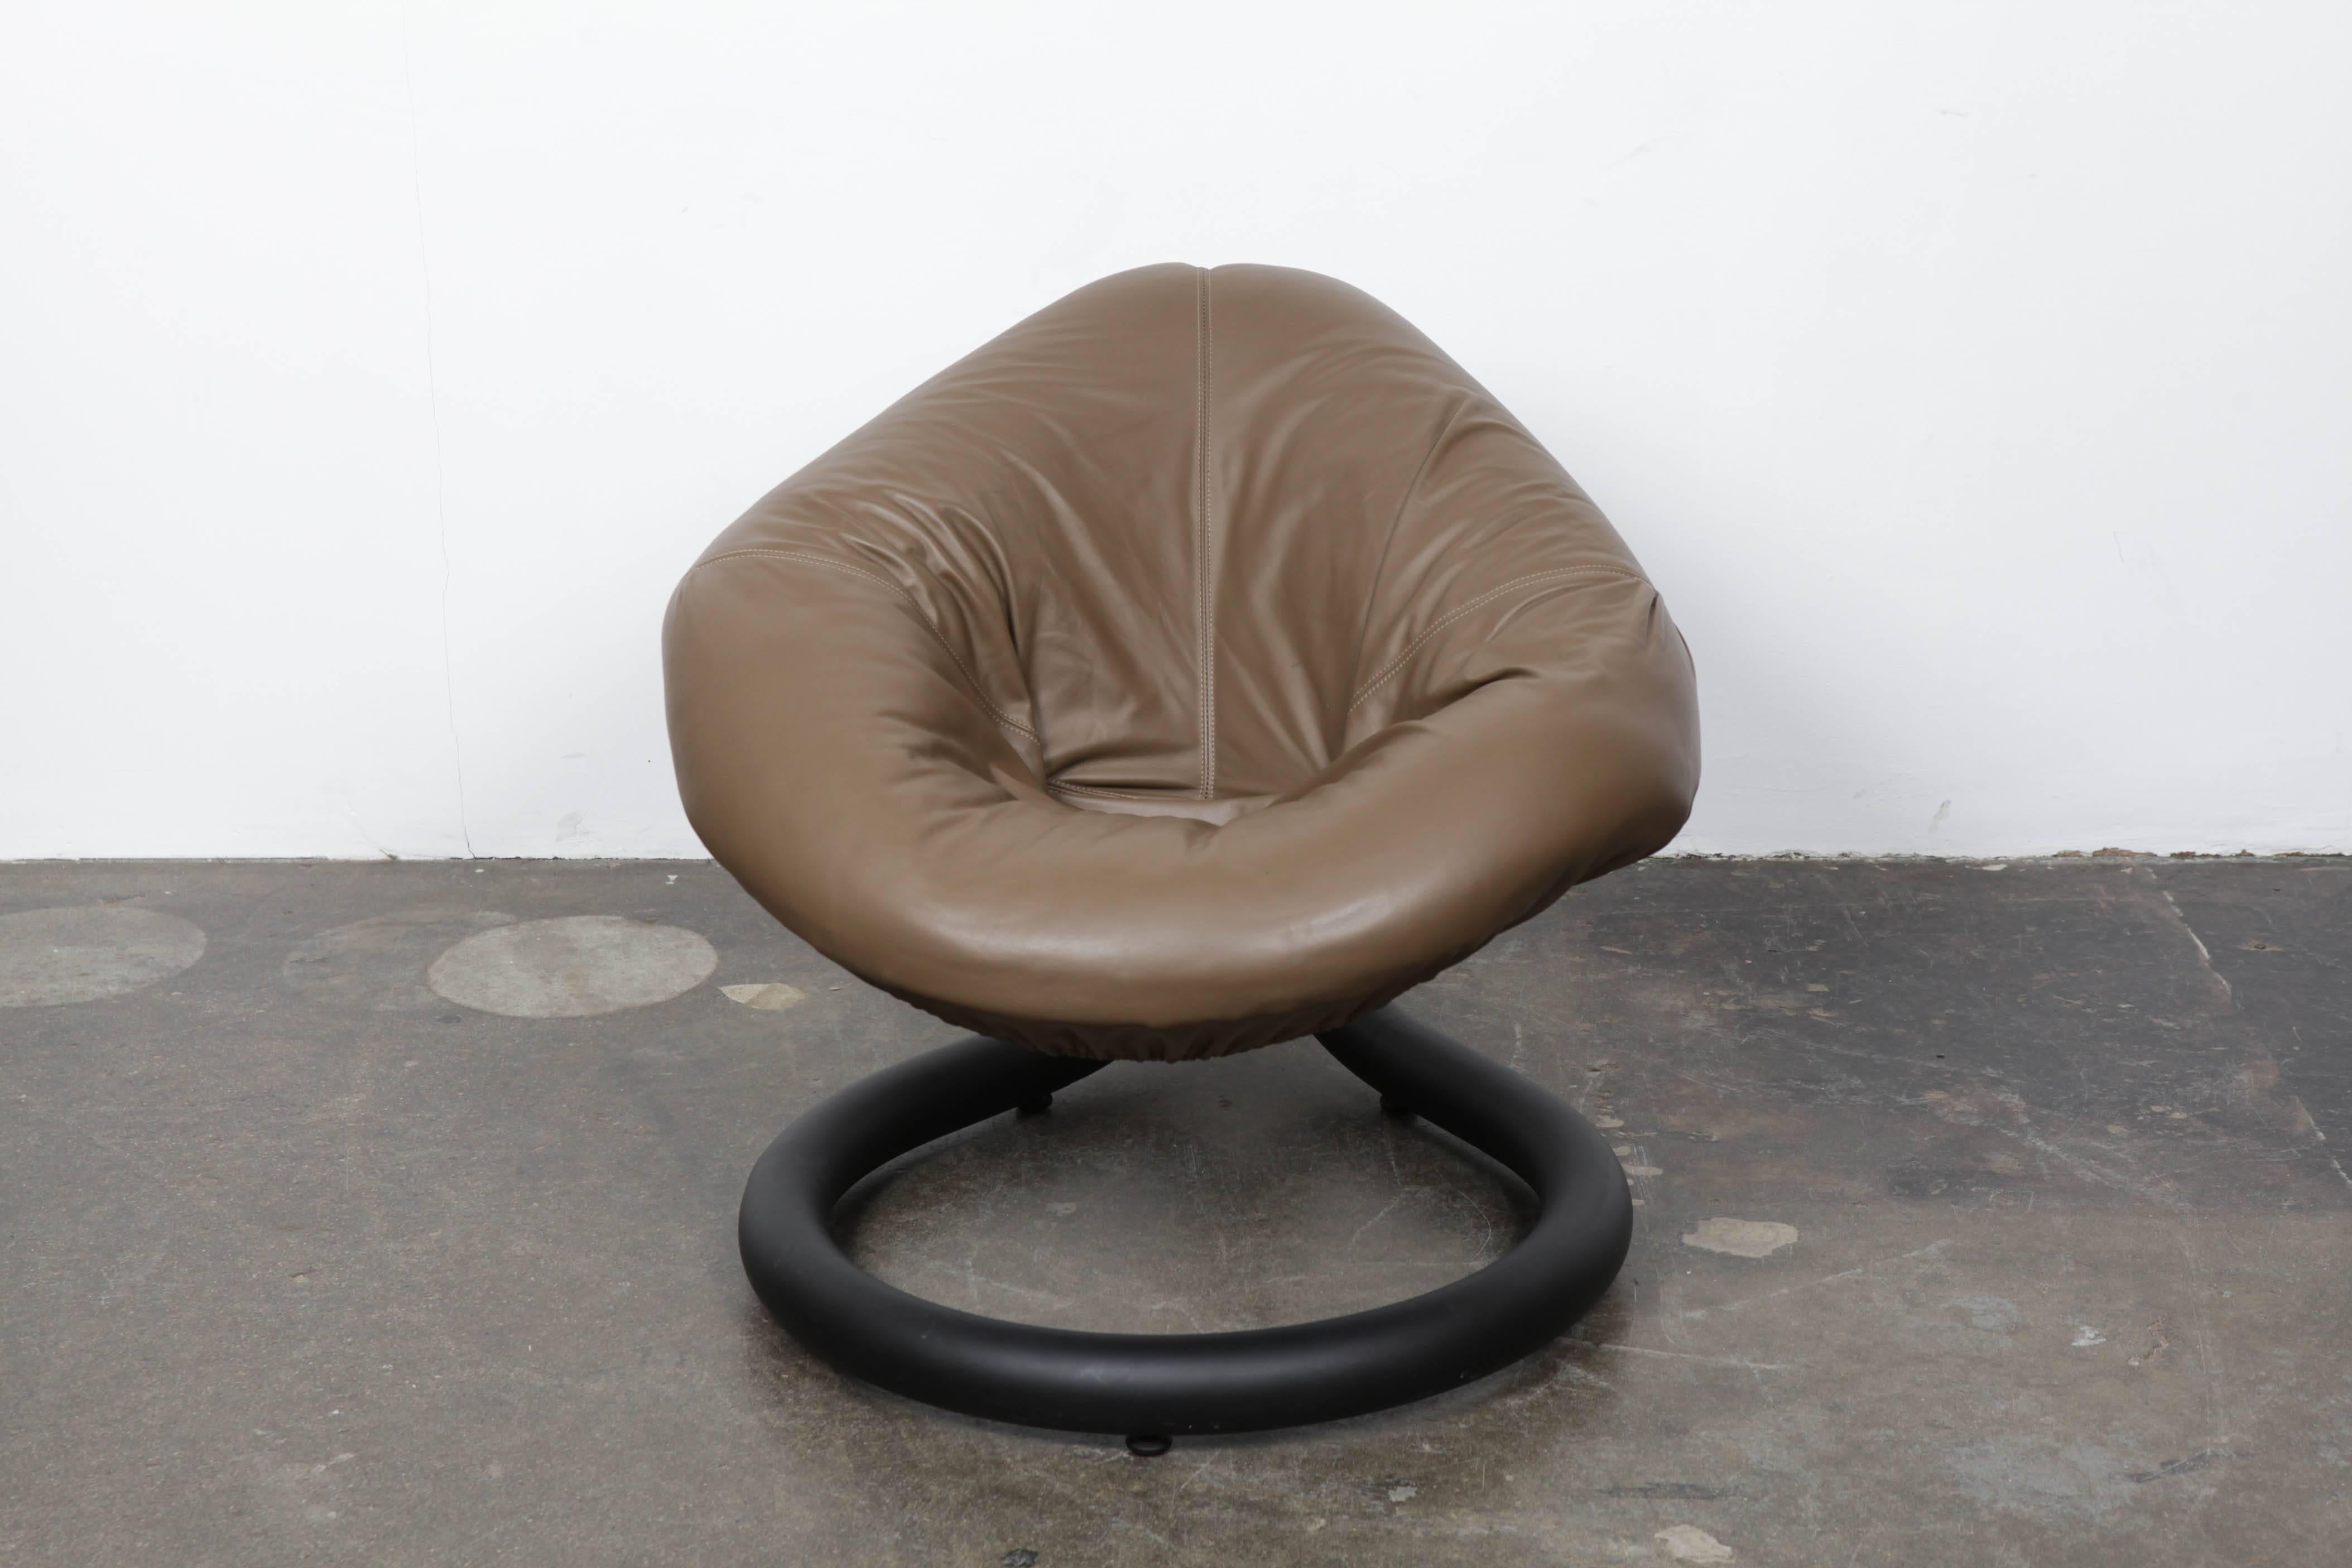 A unique single chair by an unknown Brazilian designer. The chair has an iron base that has springs to it adding a bounce to the seat. The seat is upholstered in leather and is shaped like a tear drop.